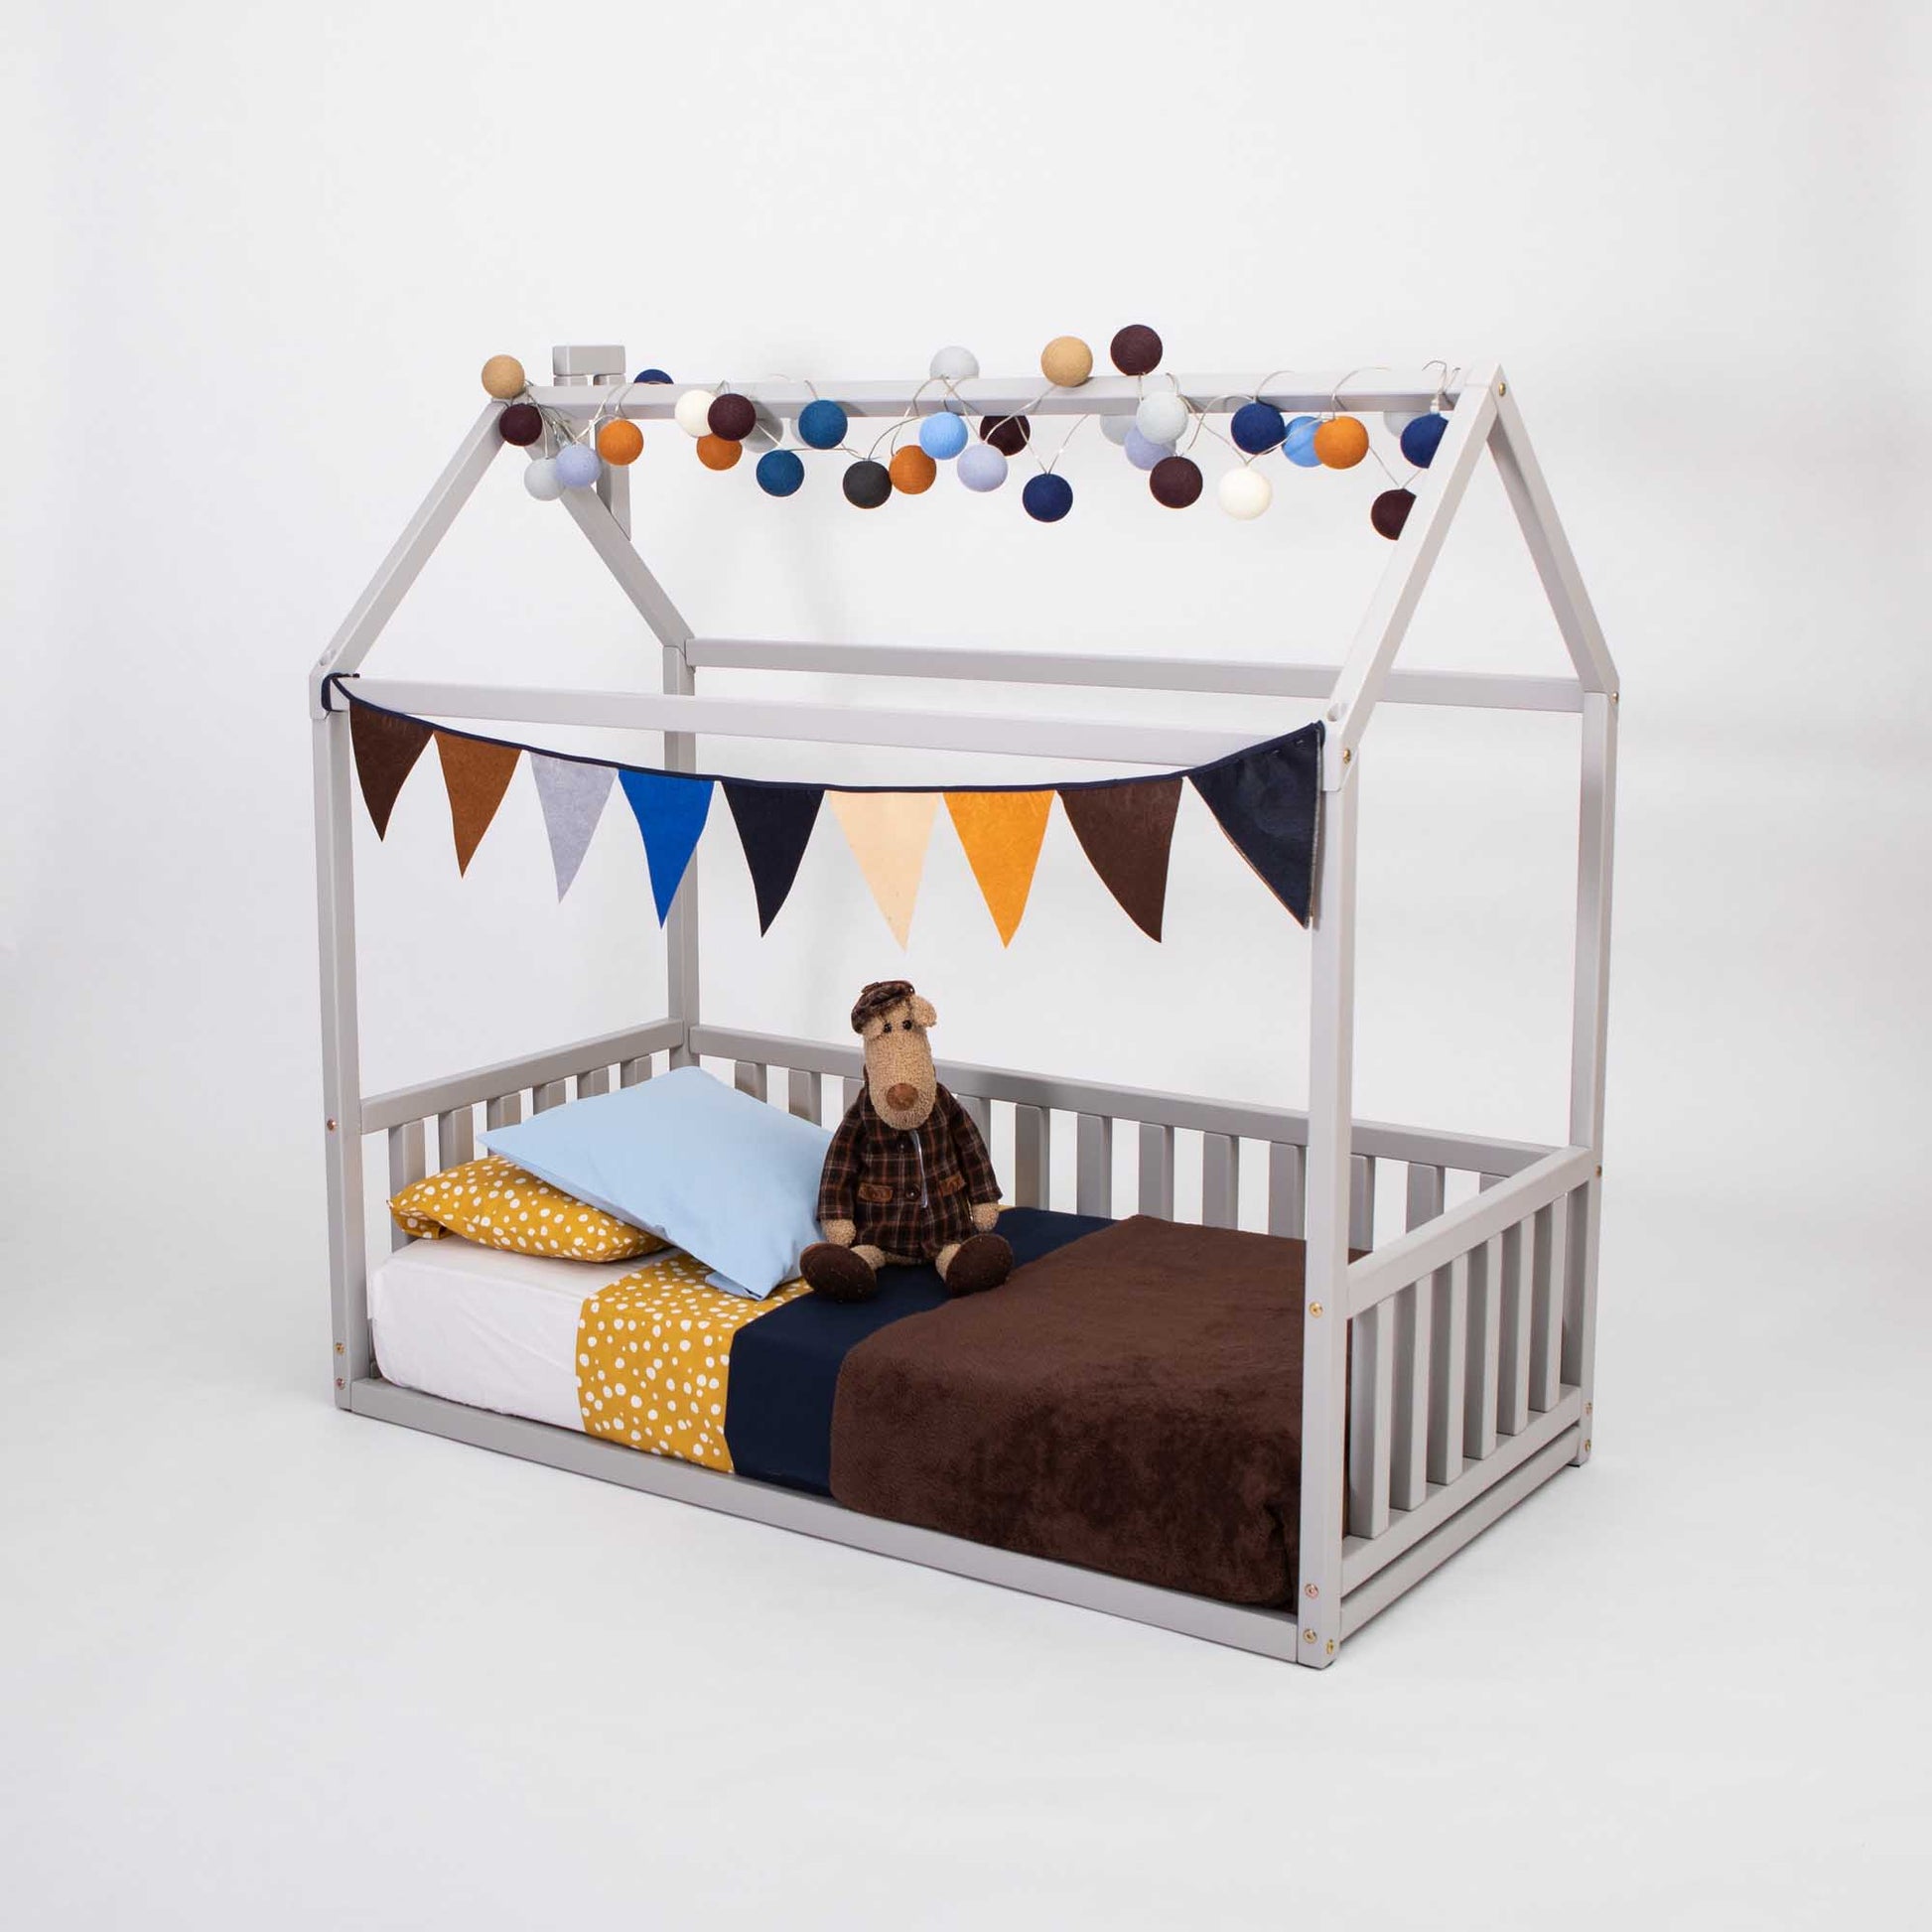 A preschool bed adorned with bunting and cuddly stuffed animals, creating a cozy sleep haven in the Sweet Home From Wood Kids' house-frame bed with 3-sided rails.